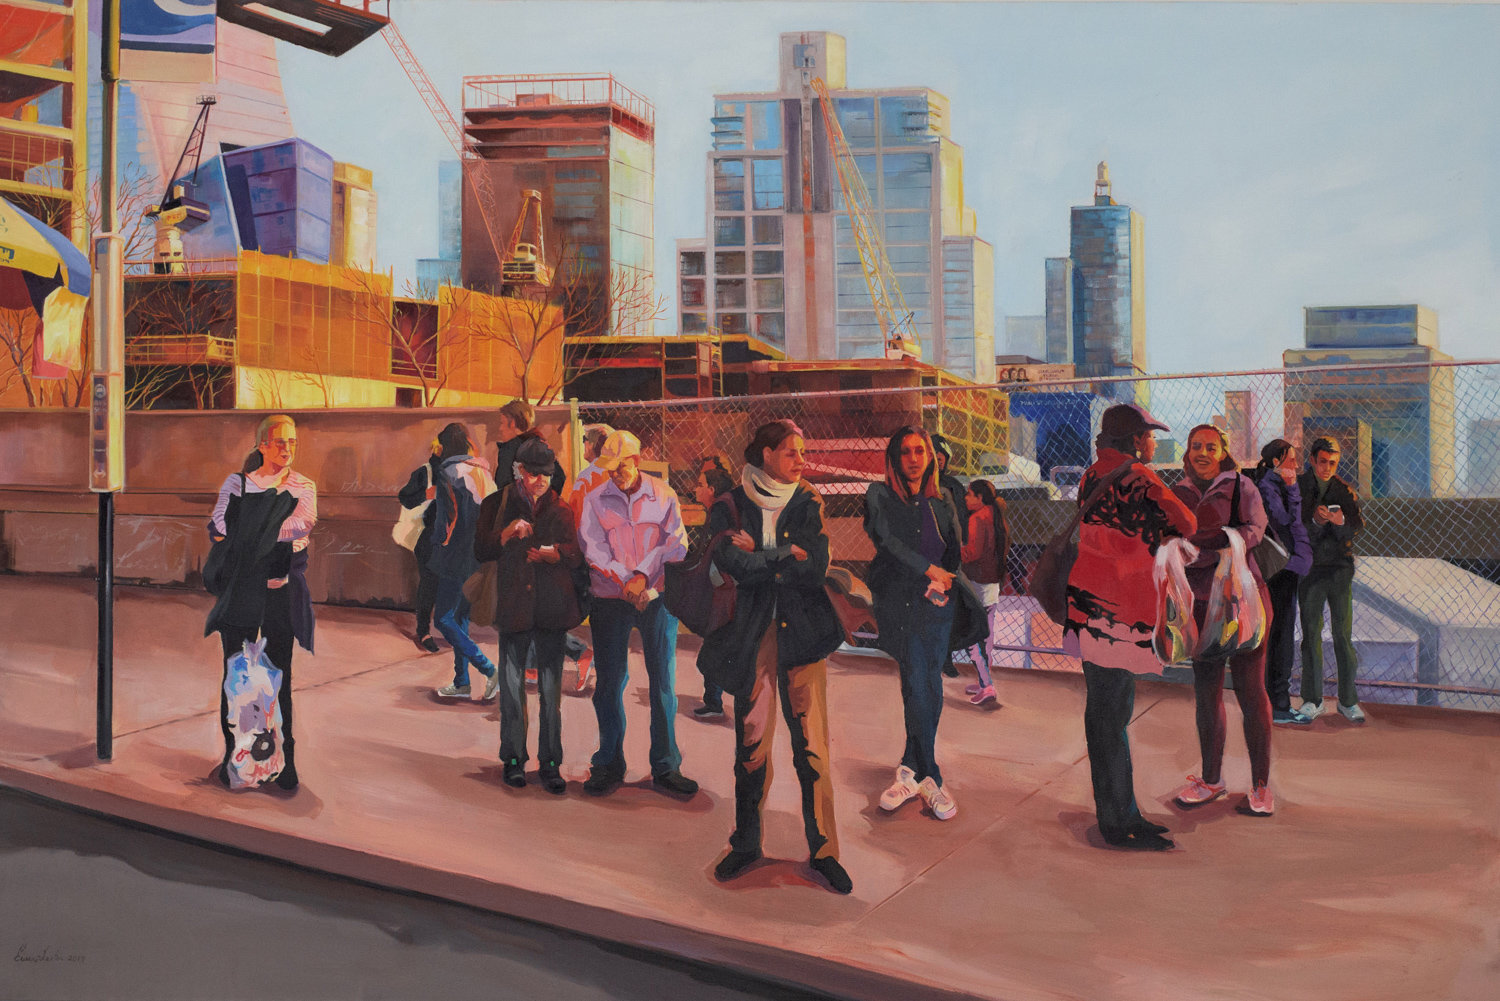 Julia Eisen-Lester’s painting ‘Waiting’ is included in the exhibition ‘Urban Tides,’ on display through Dec. 14 at Chelsea’s Noho M55 Gallery.